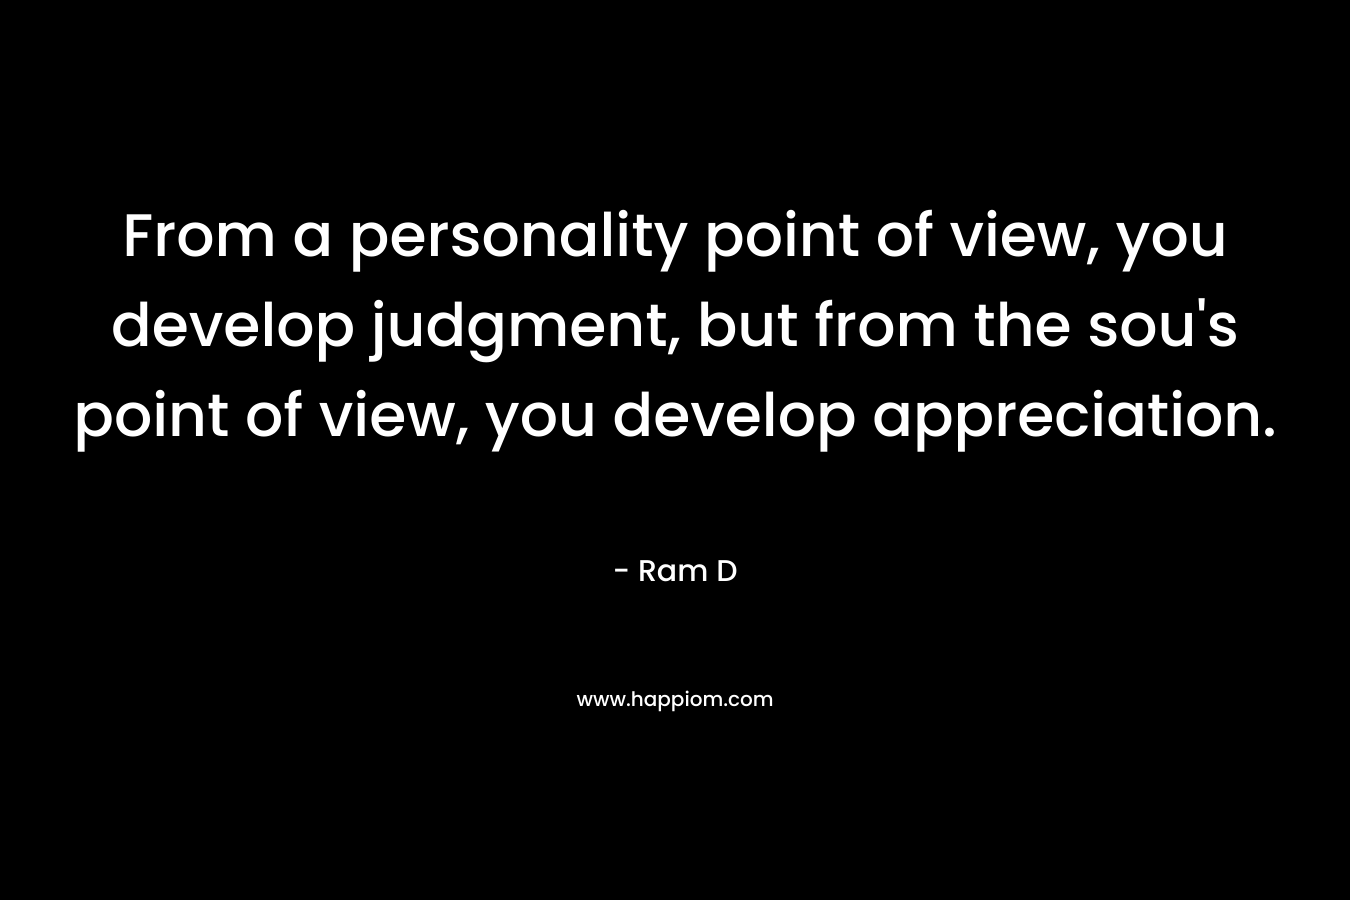 From a personality point of view, you develop judgment, but from the sou's point of view, you develop appreciation.